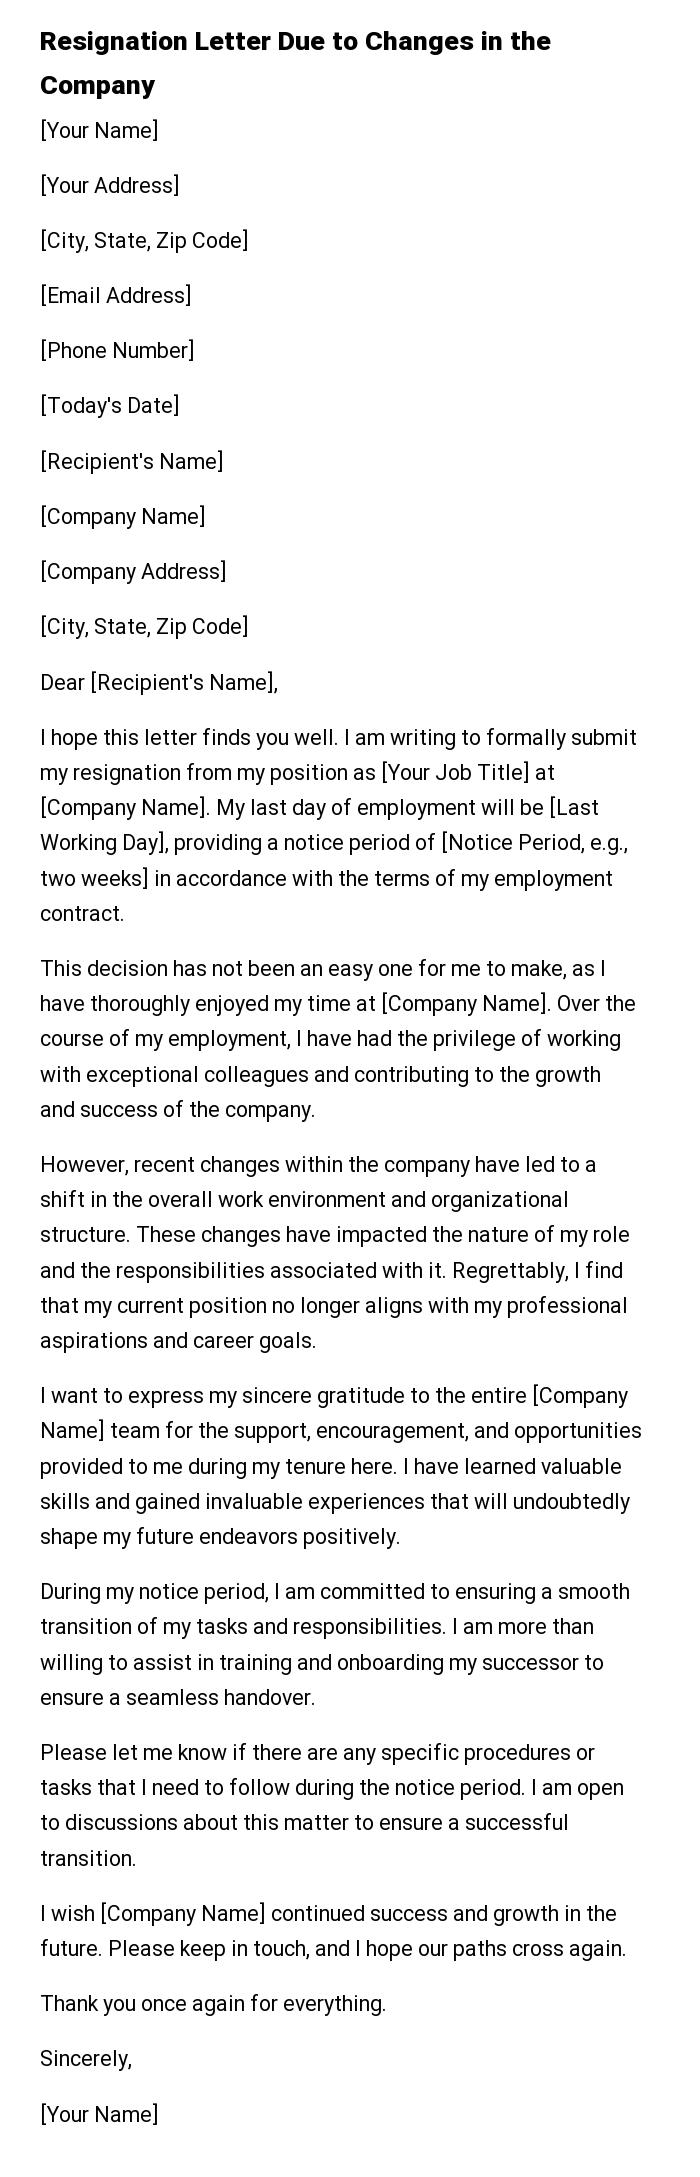 Resignation Letter Due to Changes in the Company